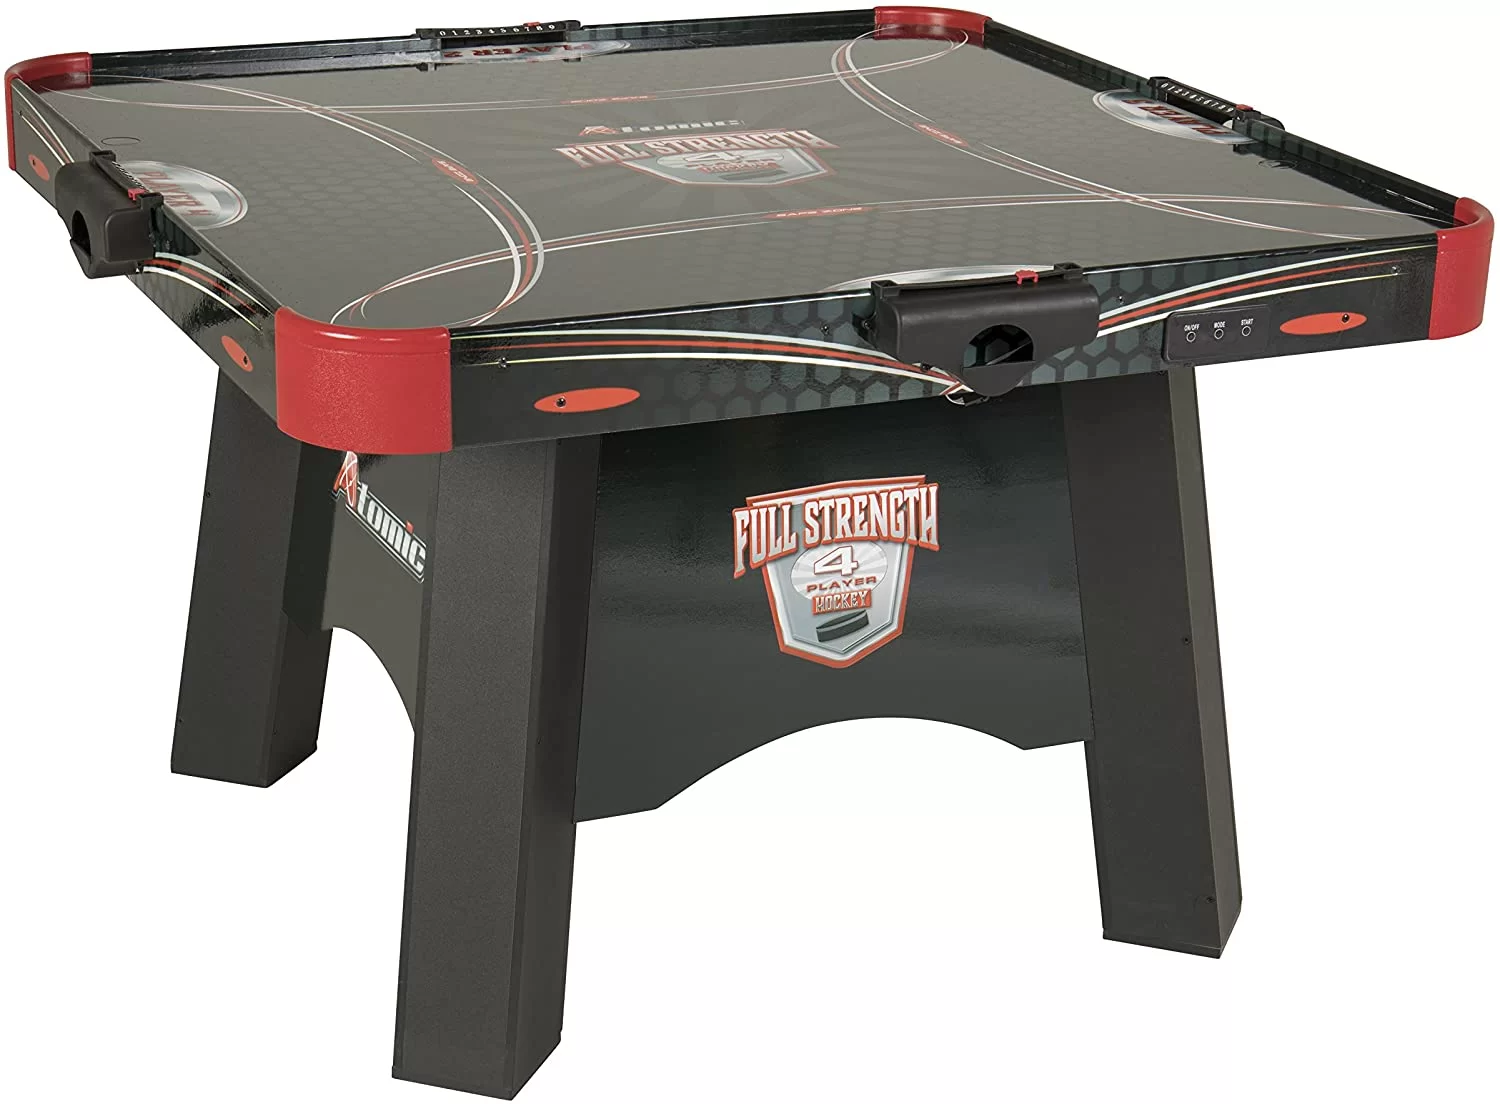 4 Person Air Hockey Table For Sale - Explore The Multiplayer Excitement